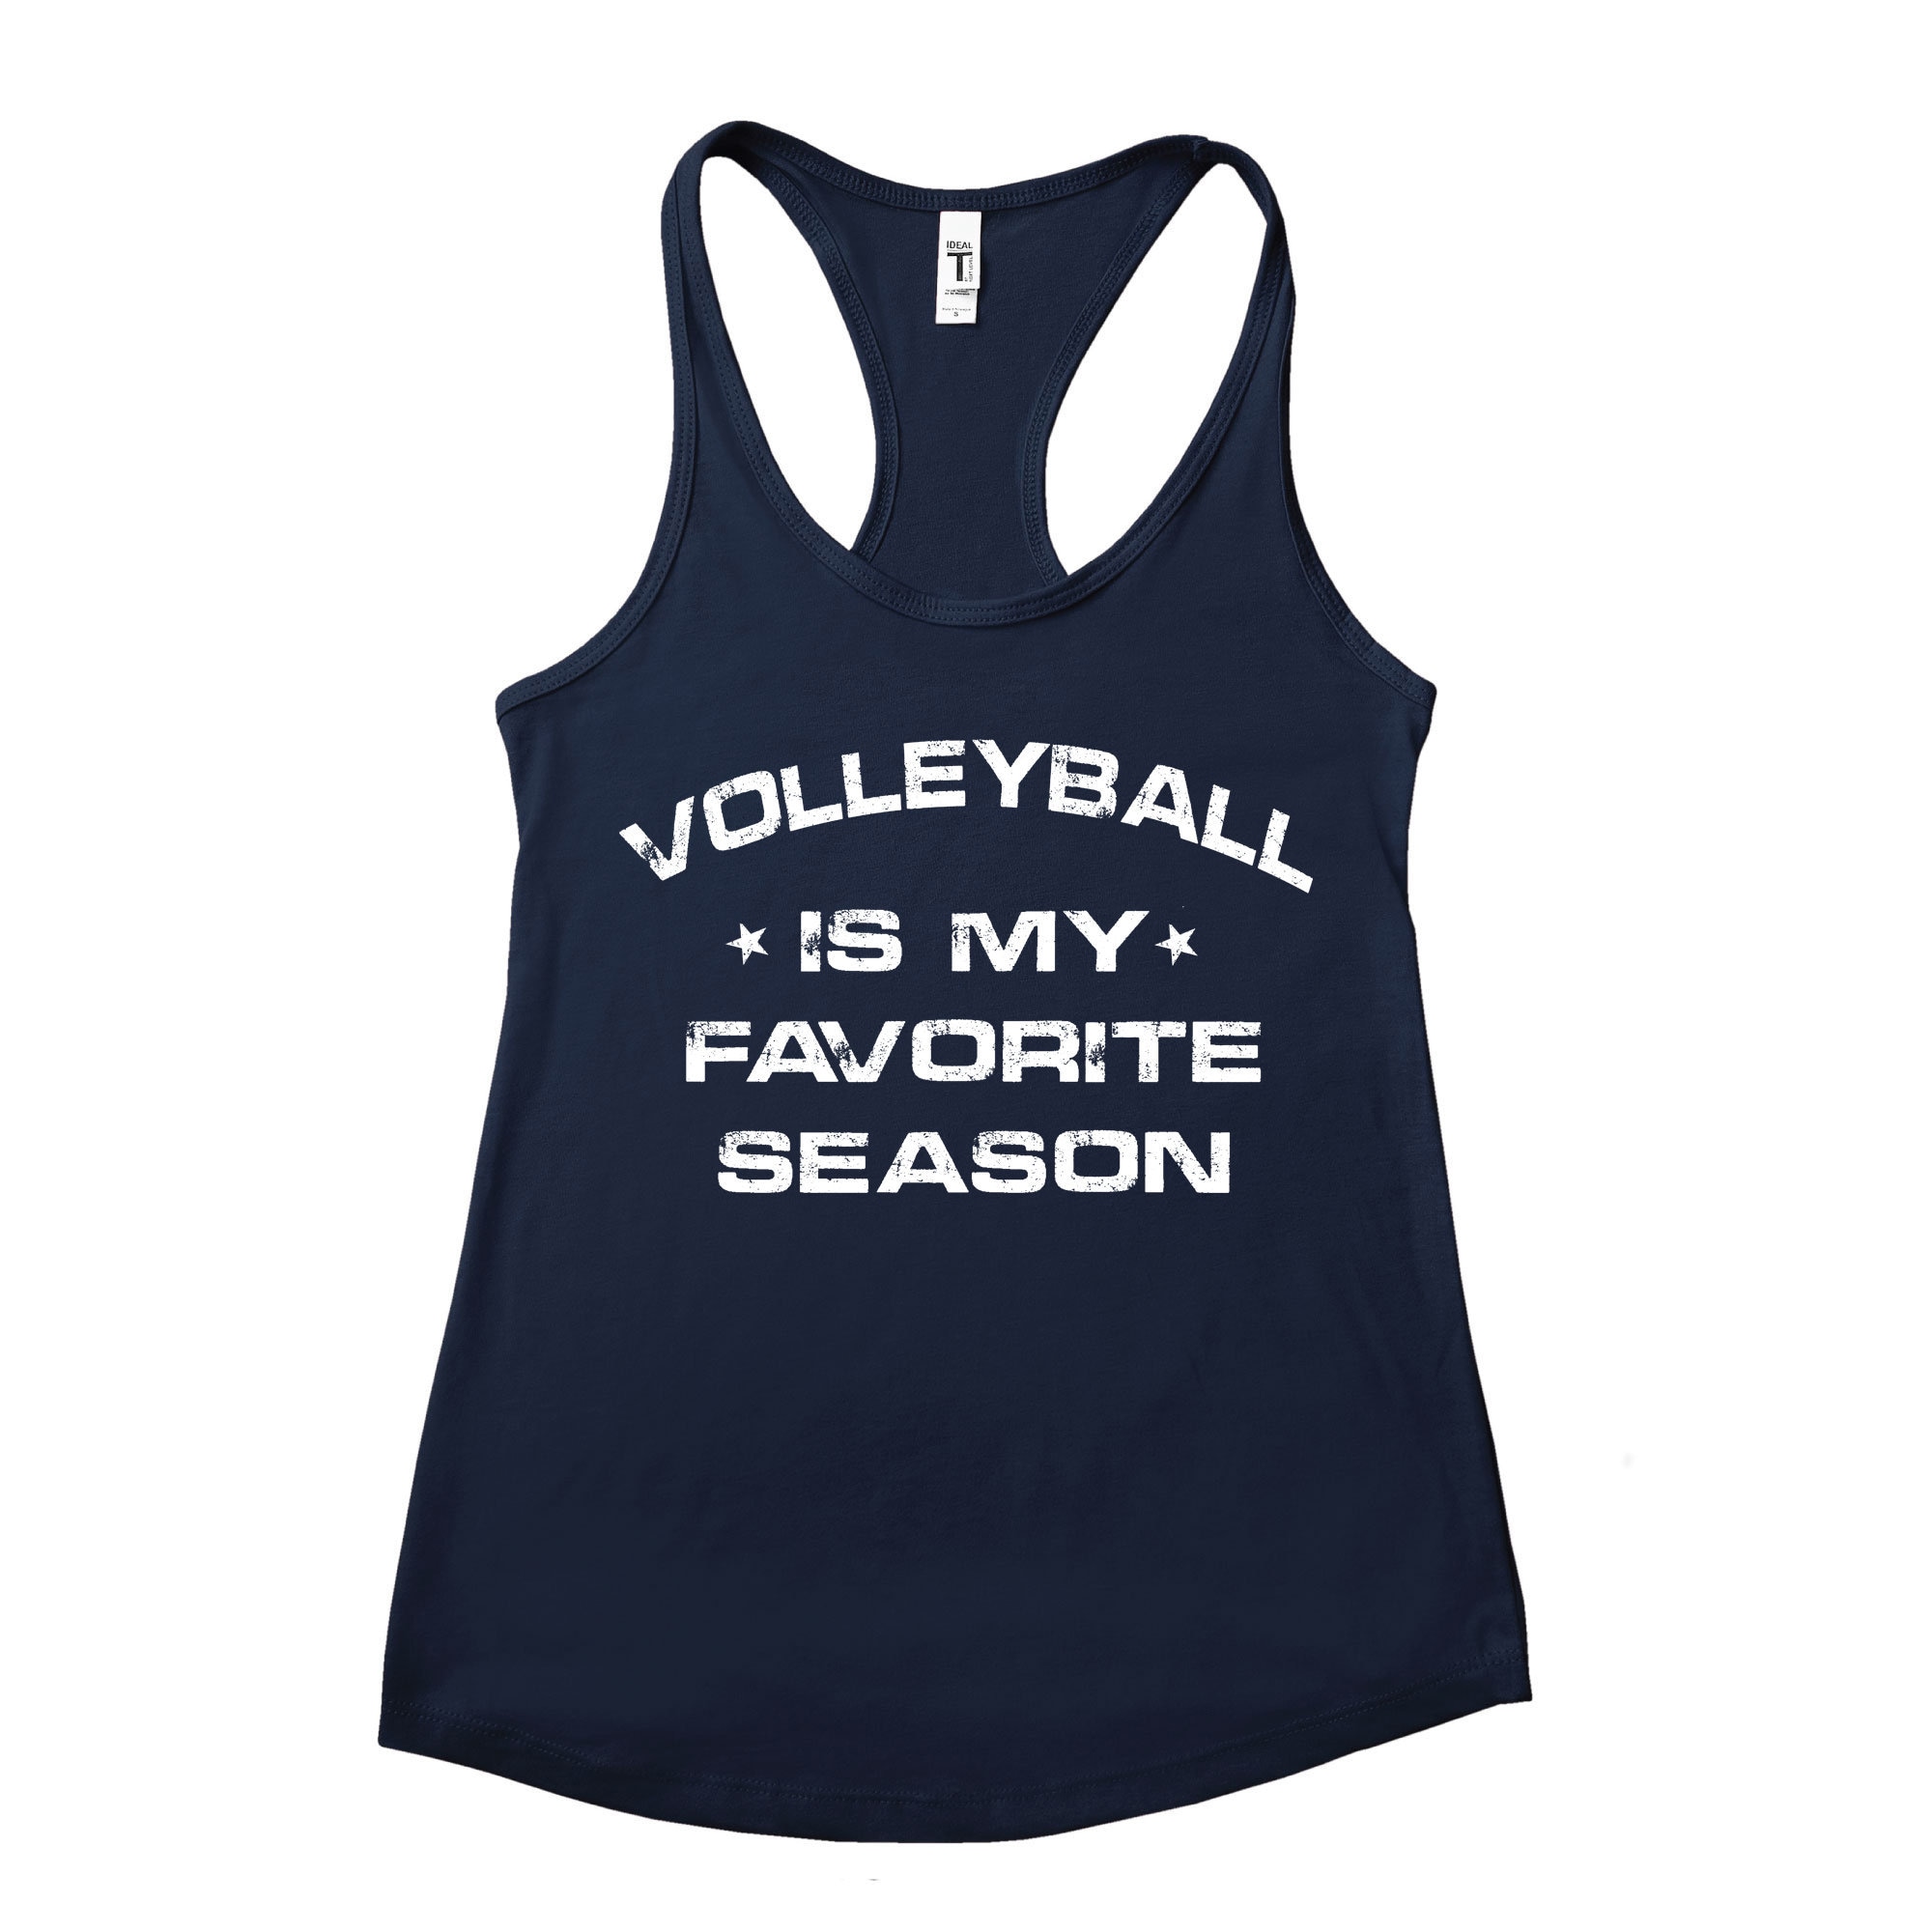 Soft Lightweight Tank Top for The Volleyball Enthusiast 